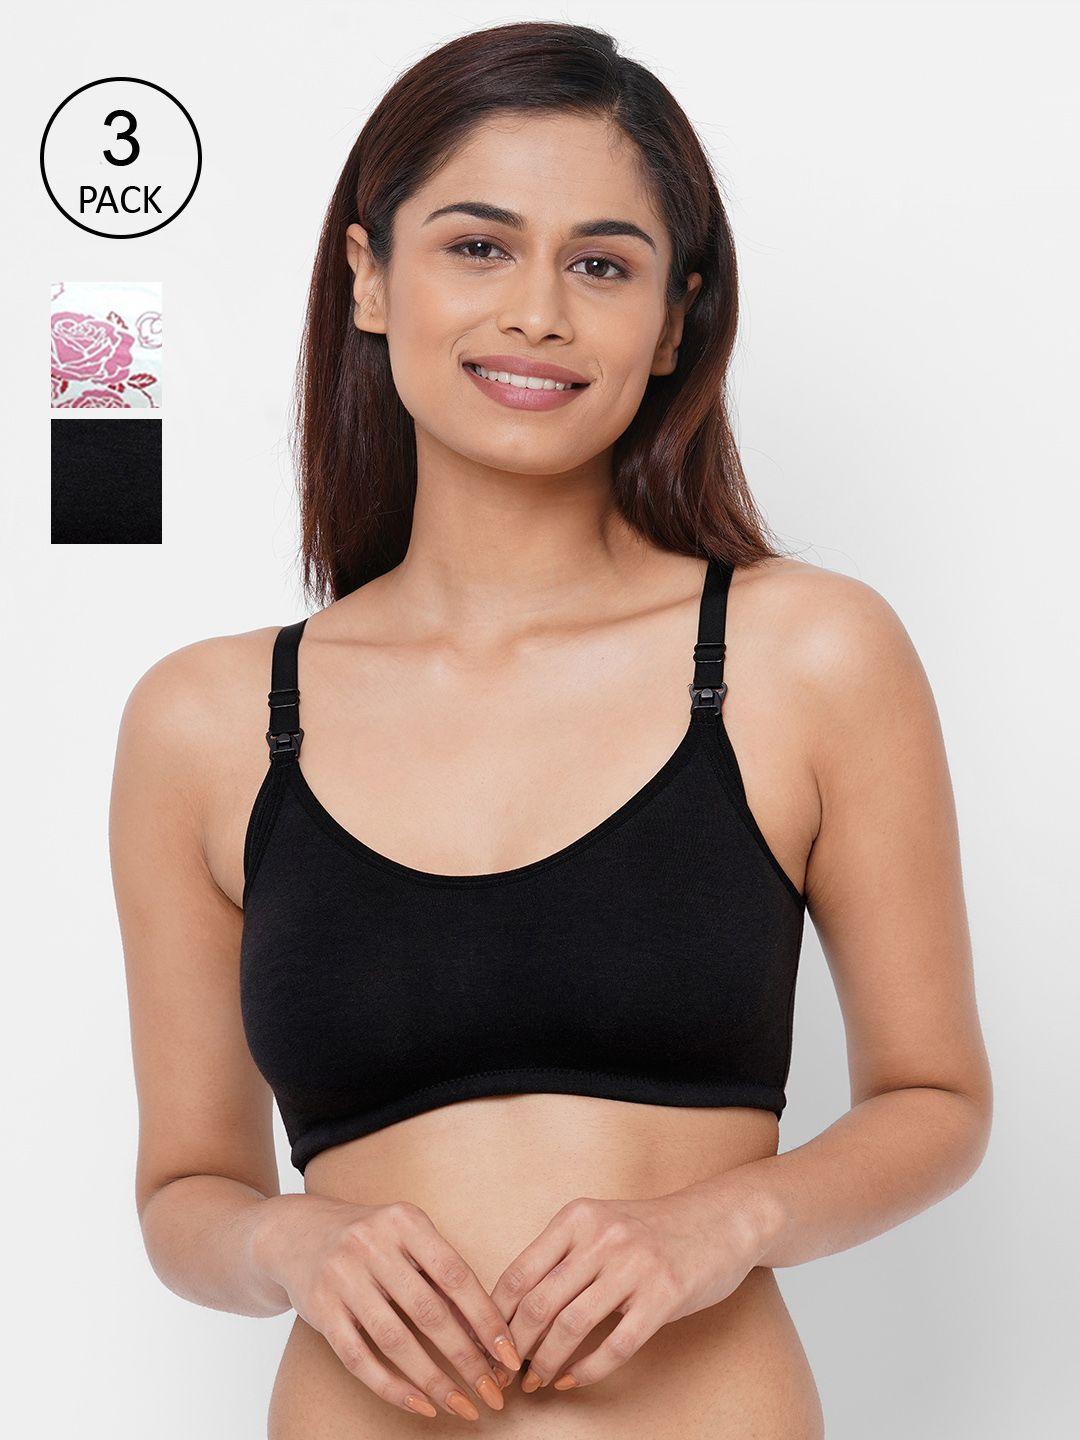 inner-sense-pack-of-3-printed-non-wired-antimicrobial-nursing-maternity-sustainable-bra-imb004e_4e_4c